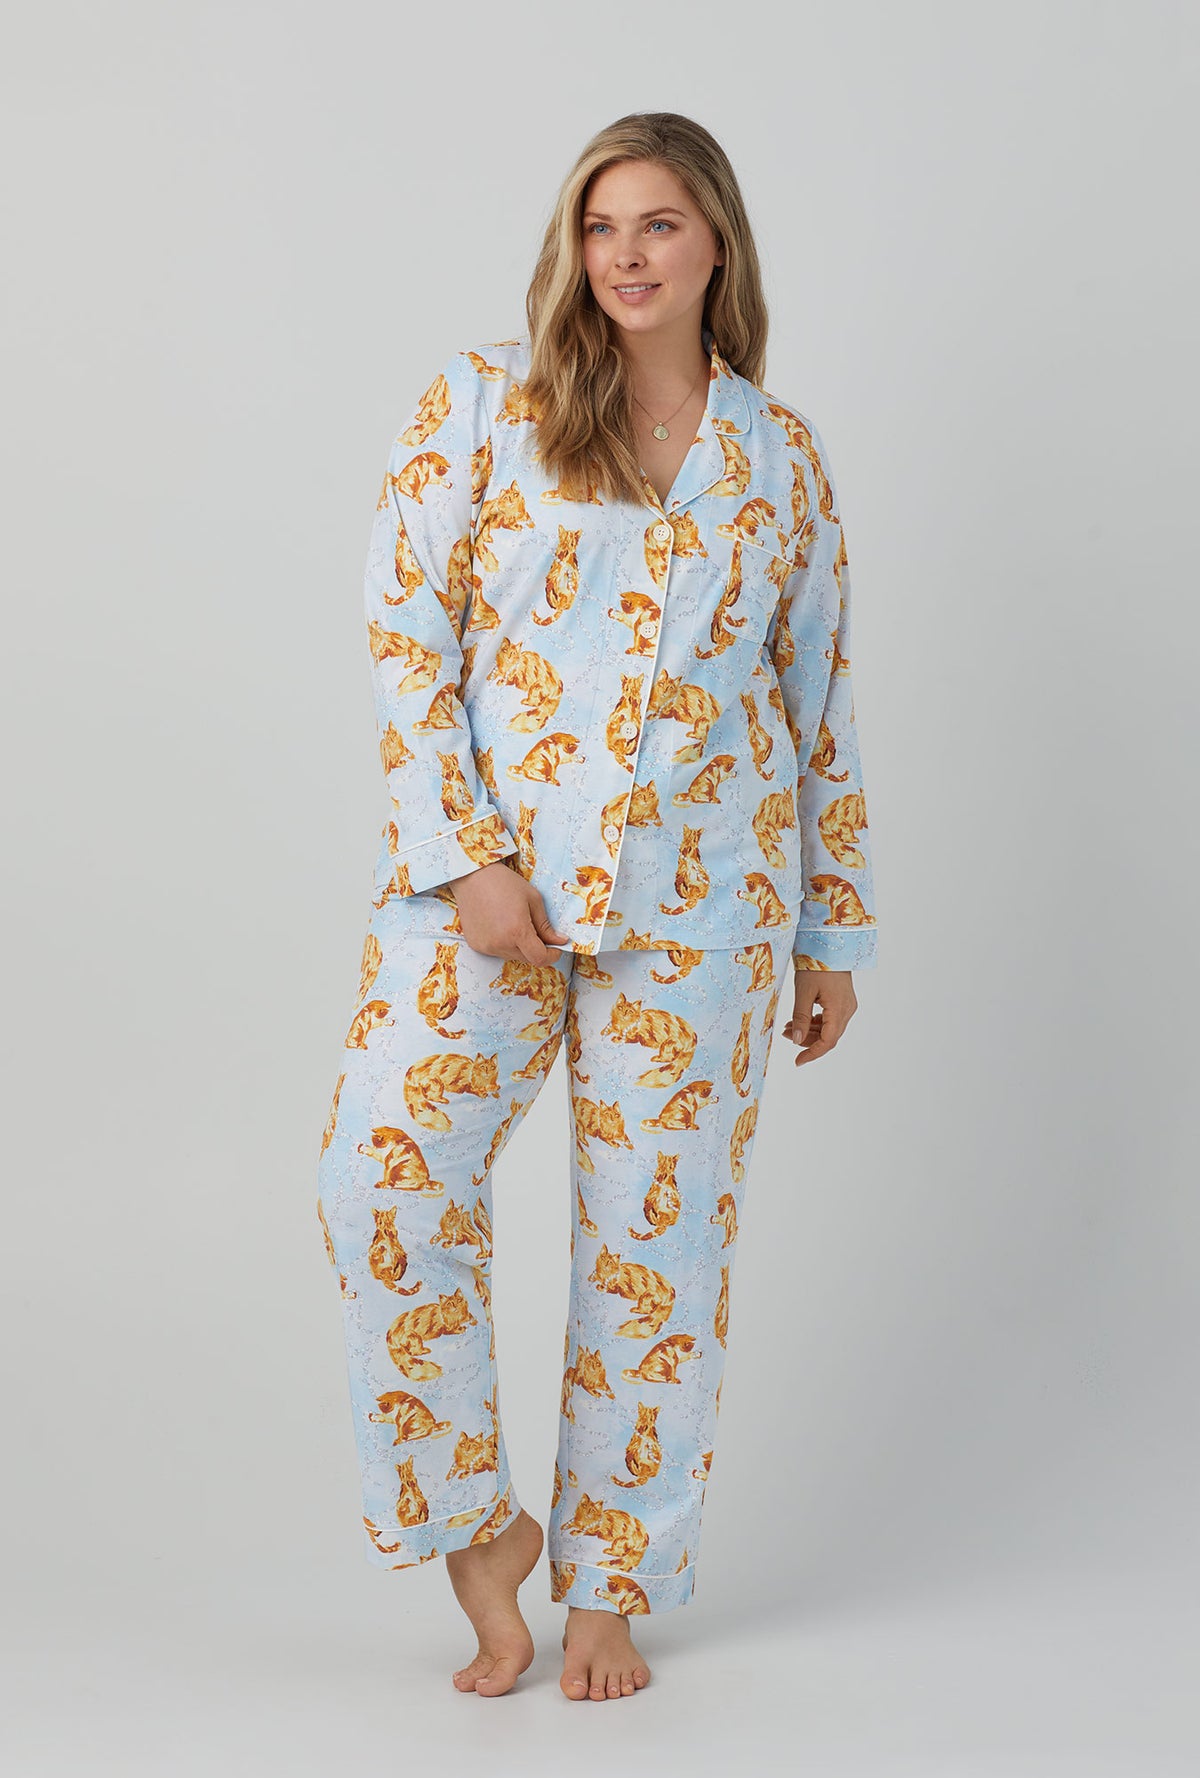 A lady wearing long sleeve classic stretch jersey pj set with fancy cats print